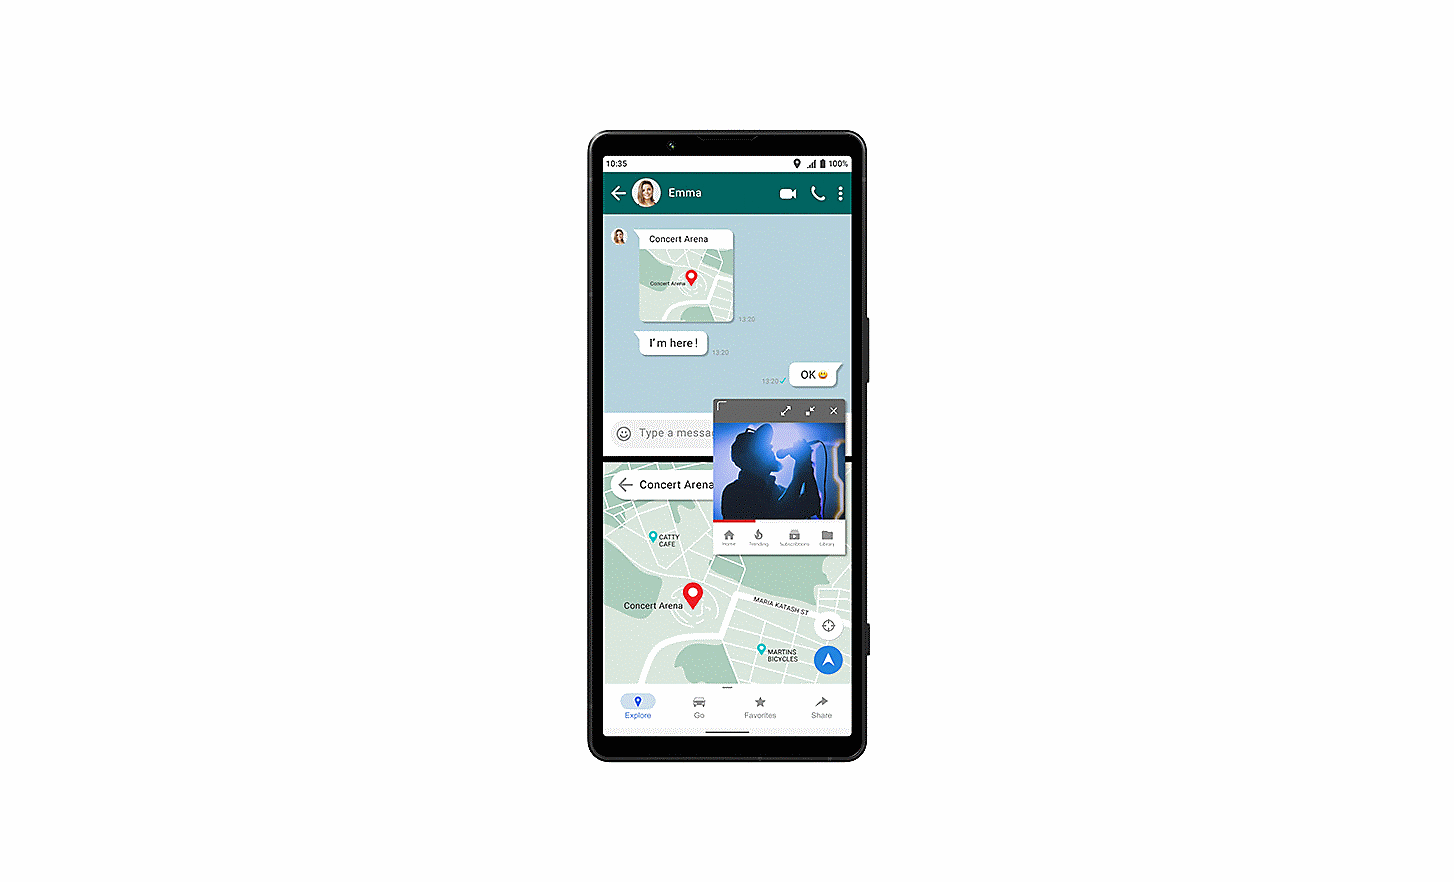 Image of a smartphone with a messaging service, map and music player all on-screen at the same time